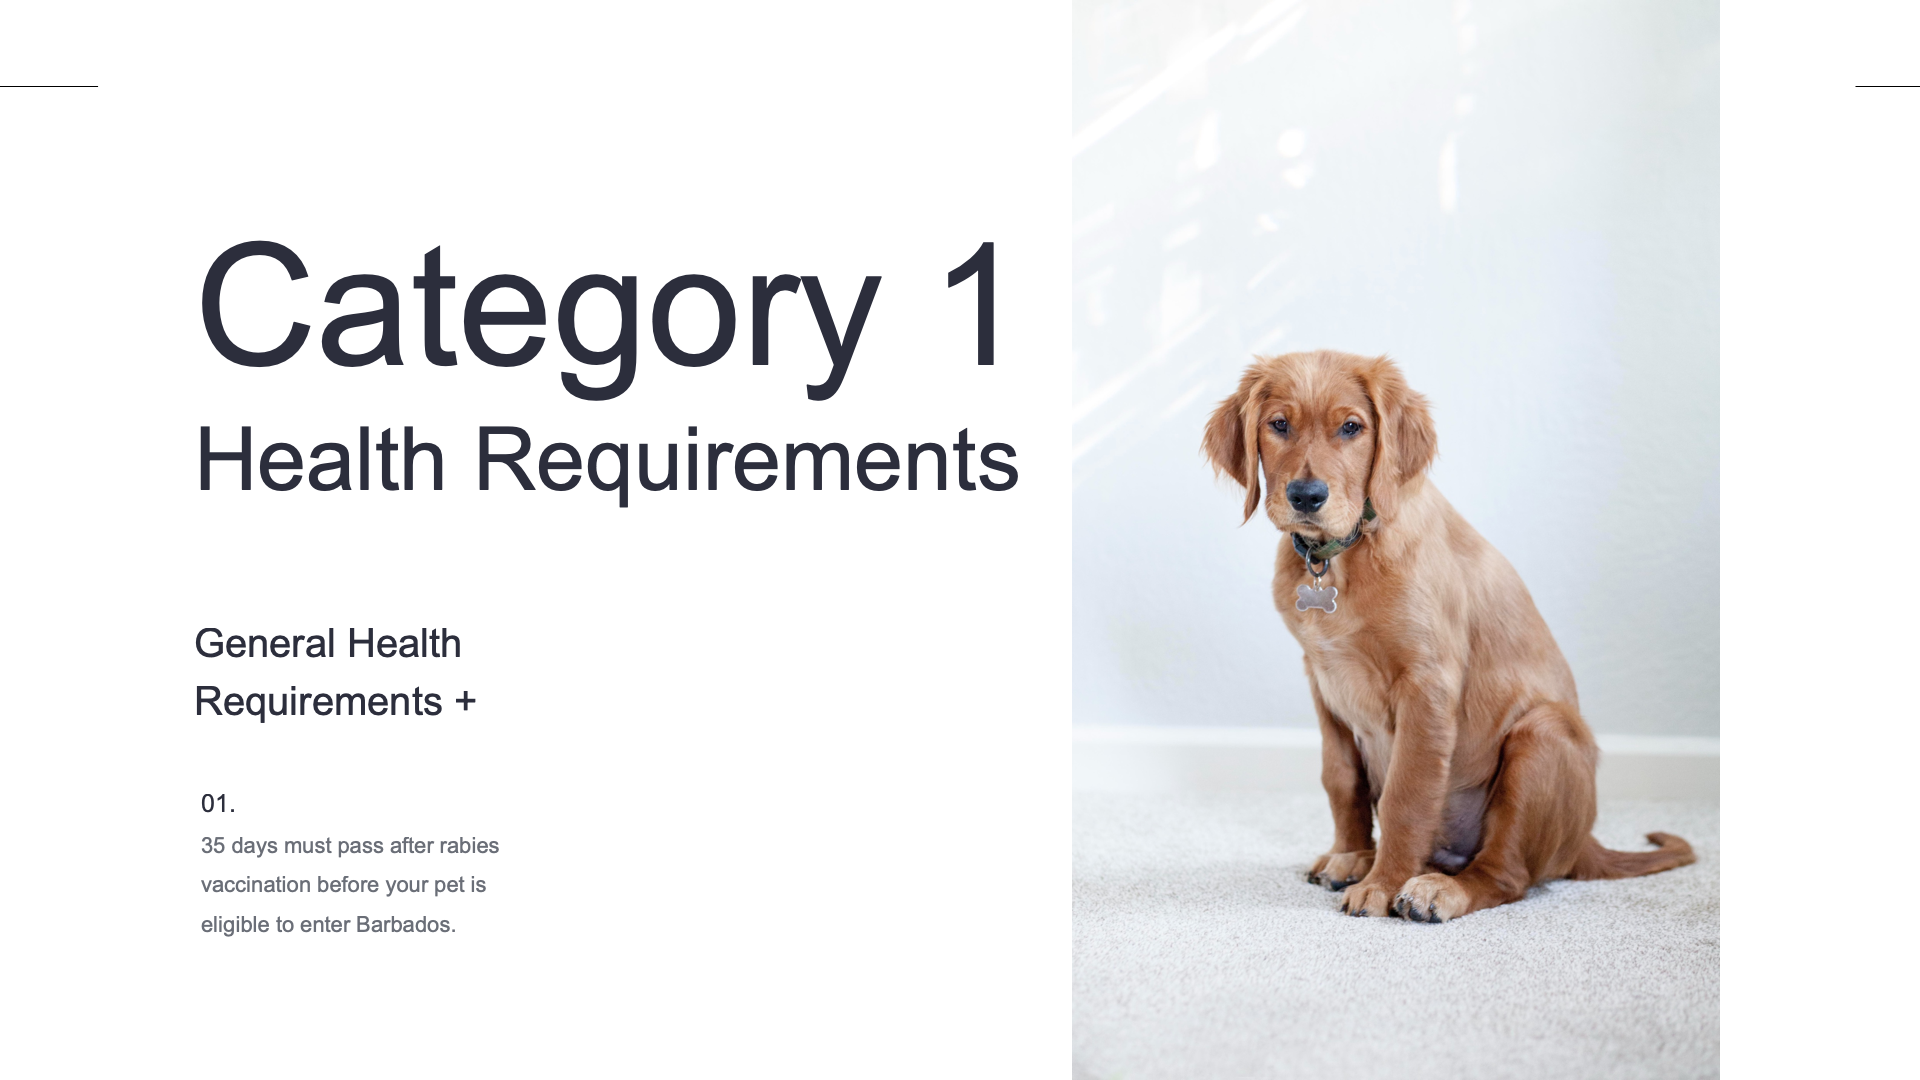 Category 1 Health Requirements